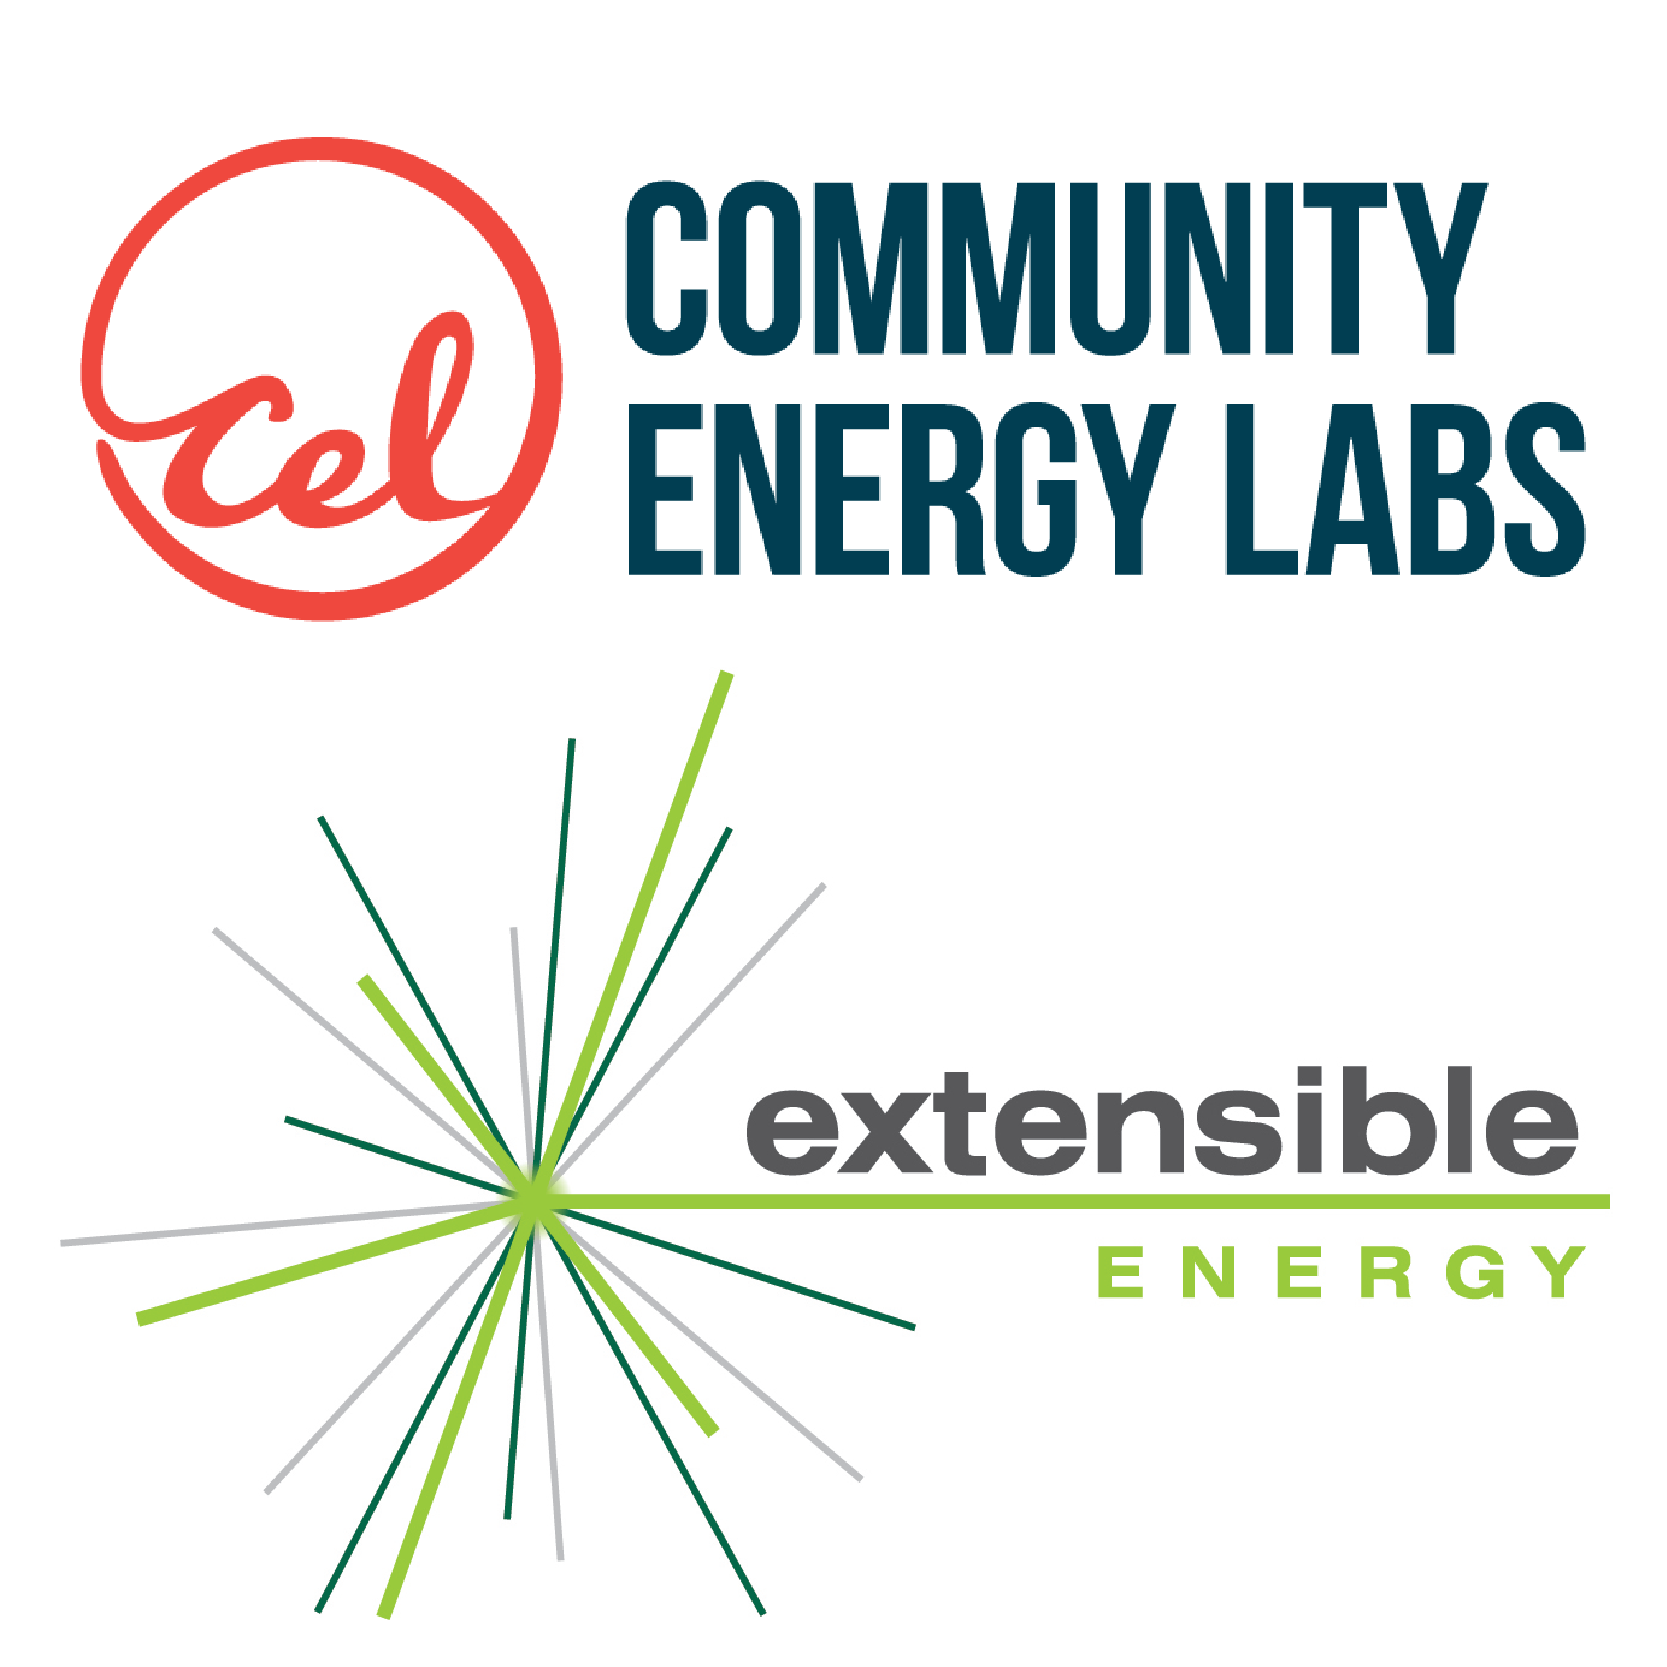 extensible energy and community energy labs logo